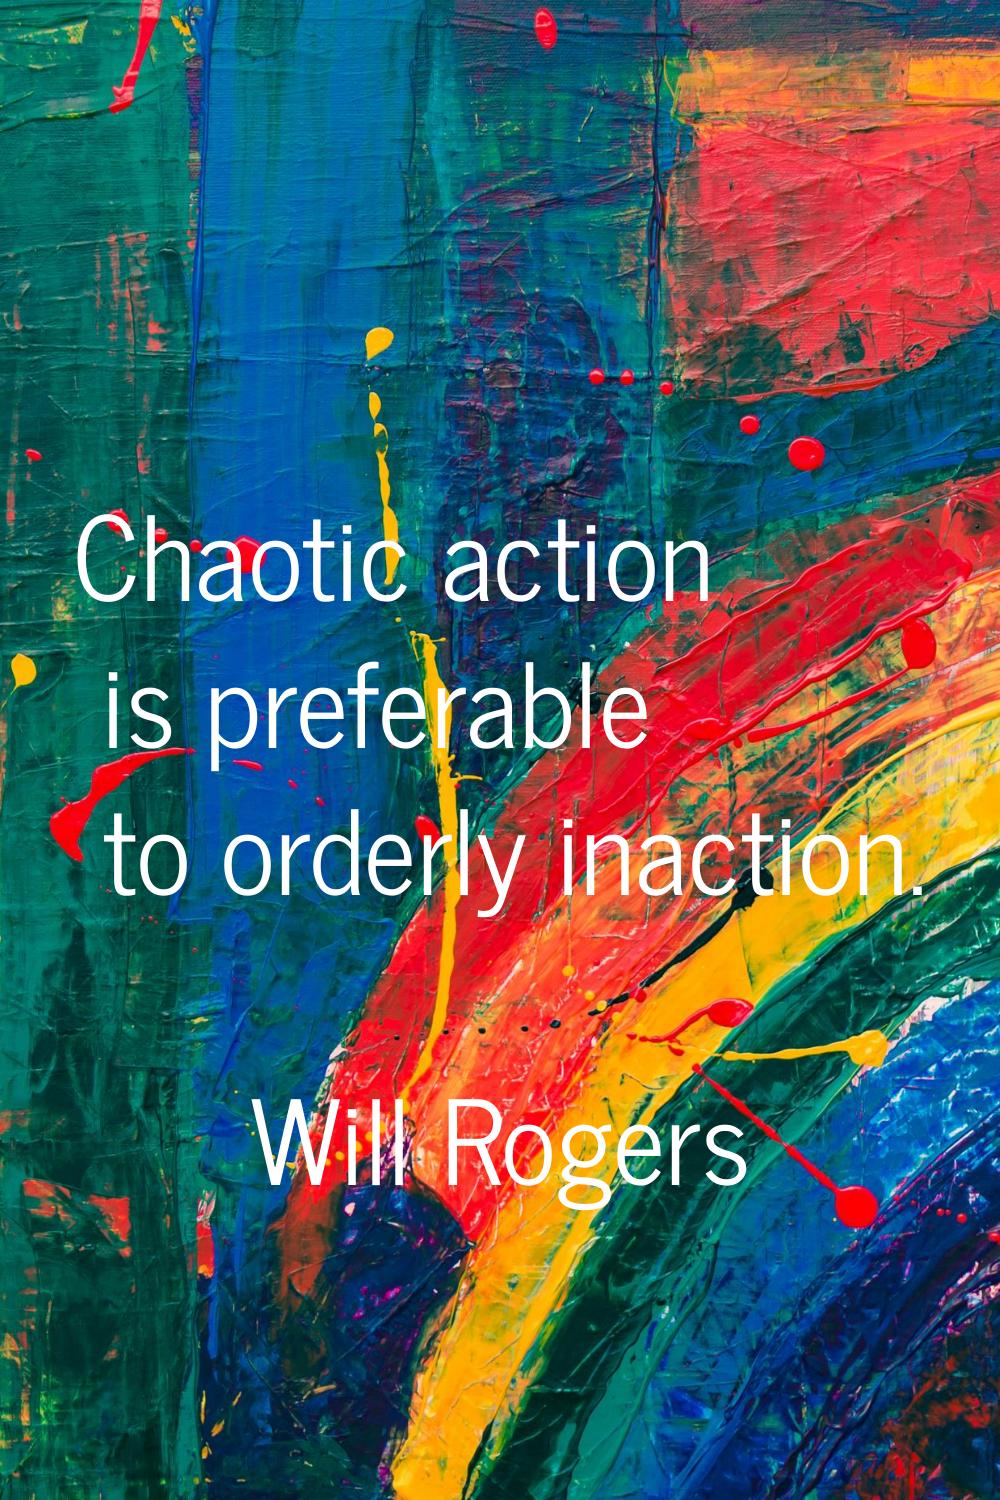 Chaotic action is preferable to orderly inaction.